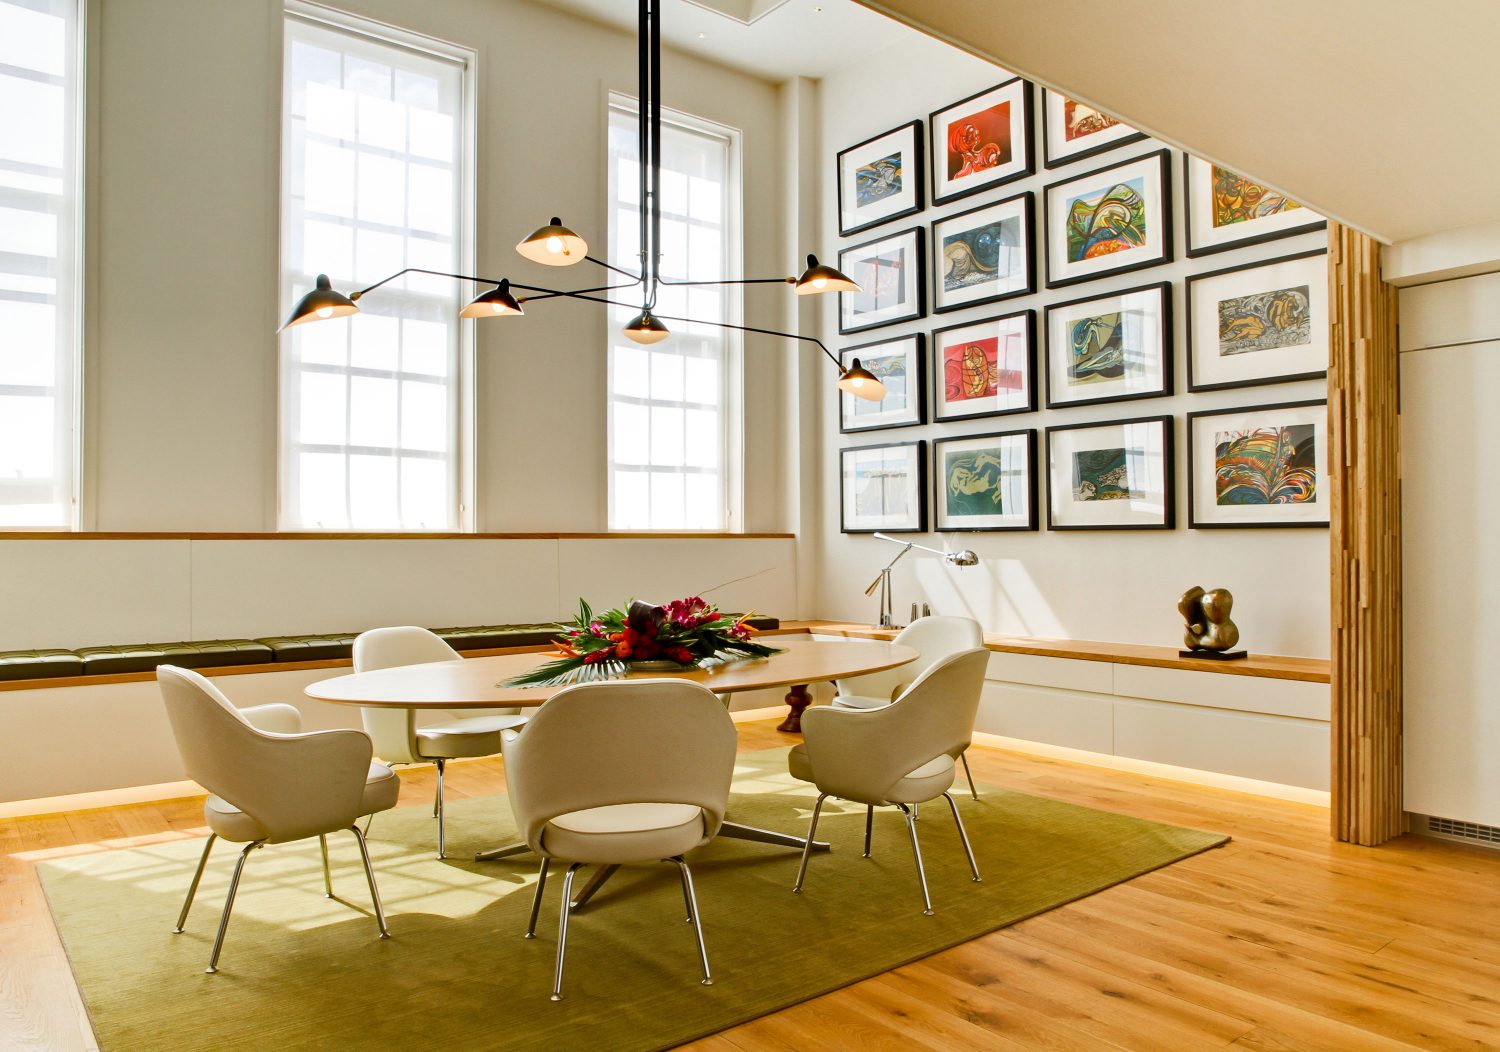 Design For Living by Daniel Hopwood – Florence Knoll dining room table feature. Mayfair interiors